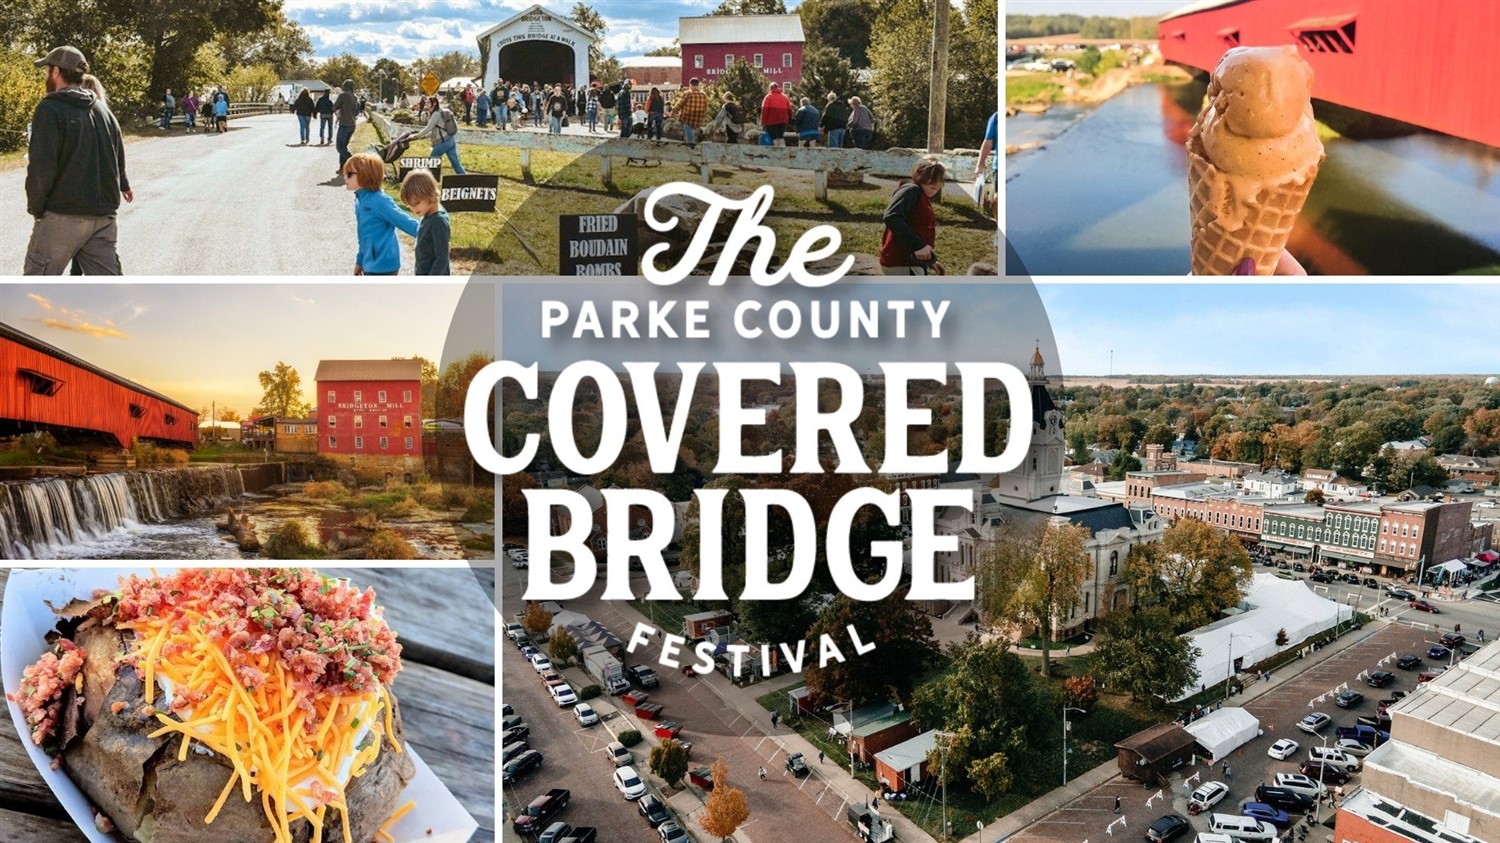 Covered Bridge Festival- Rockville, IN  on Oct 12, 04:30@Covered Bridge Tour - Pick a seat, Buy tickets and Get information on Crossroad Tours Inc. crossroadtours